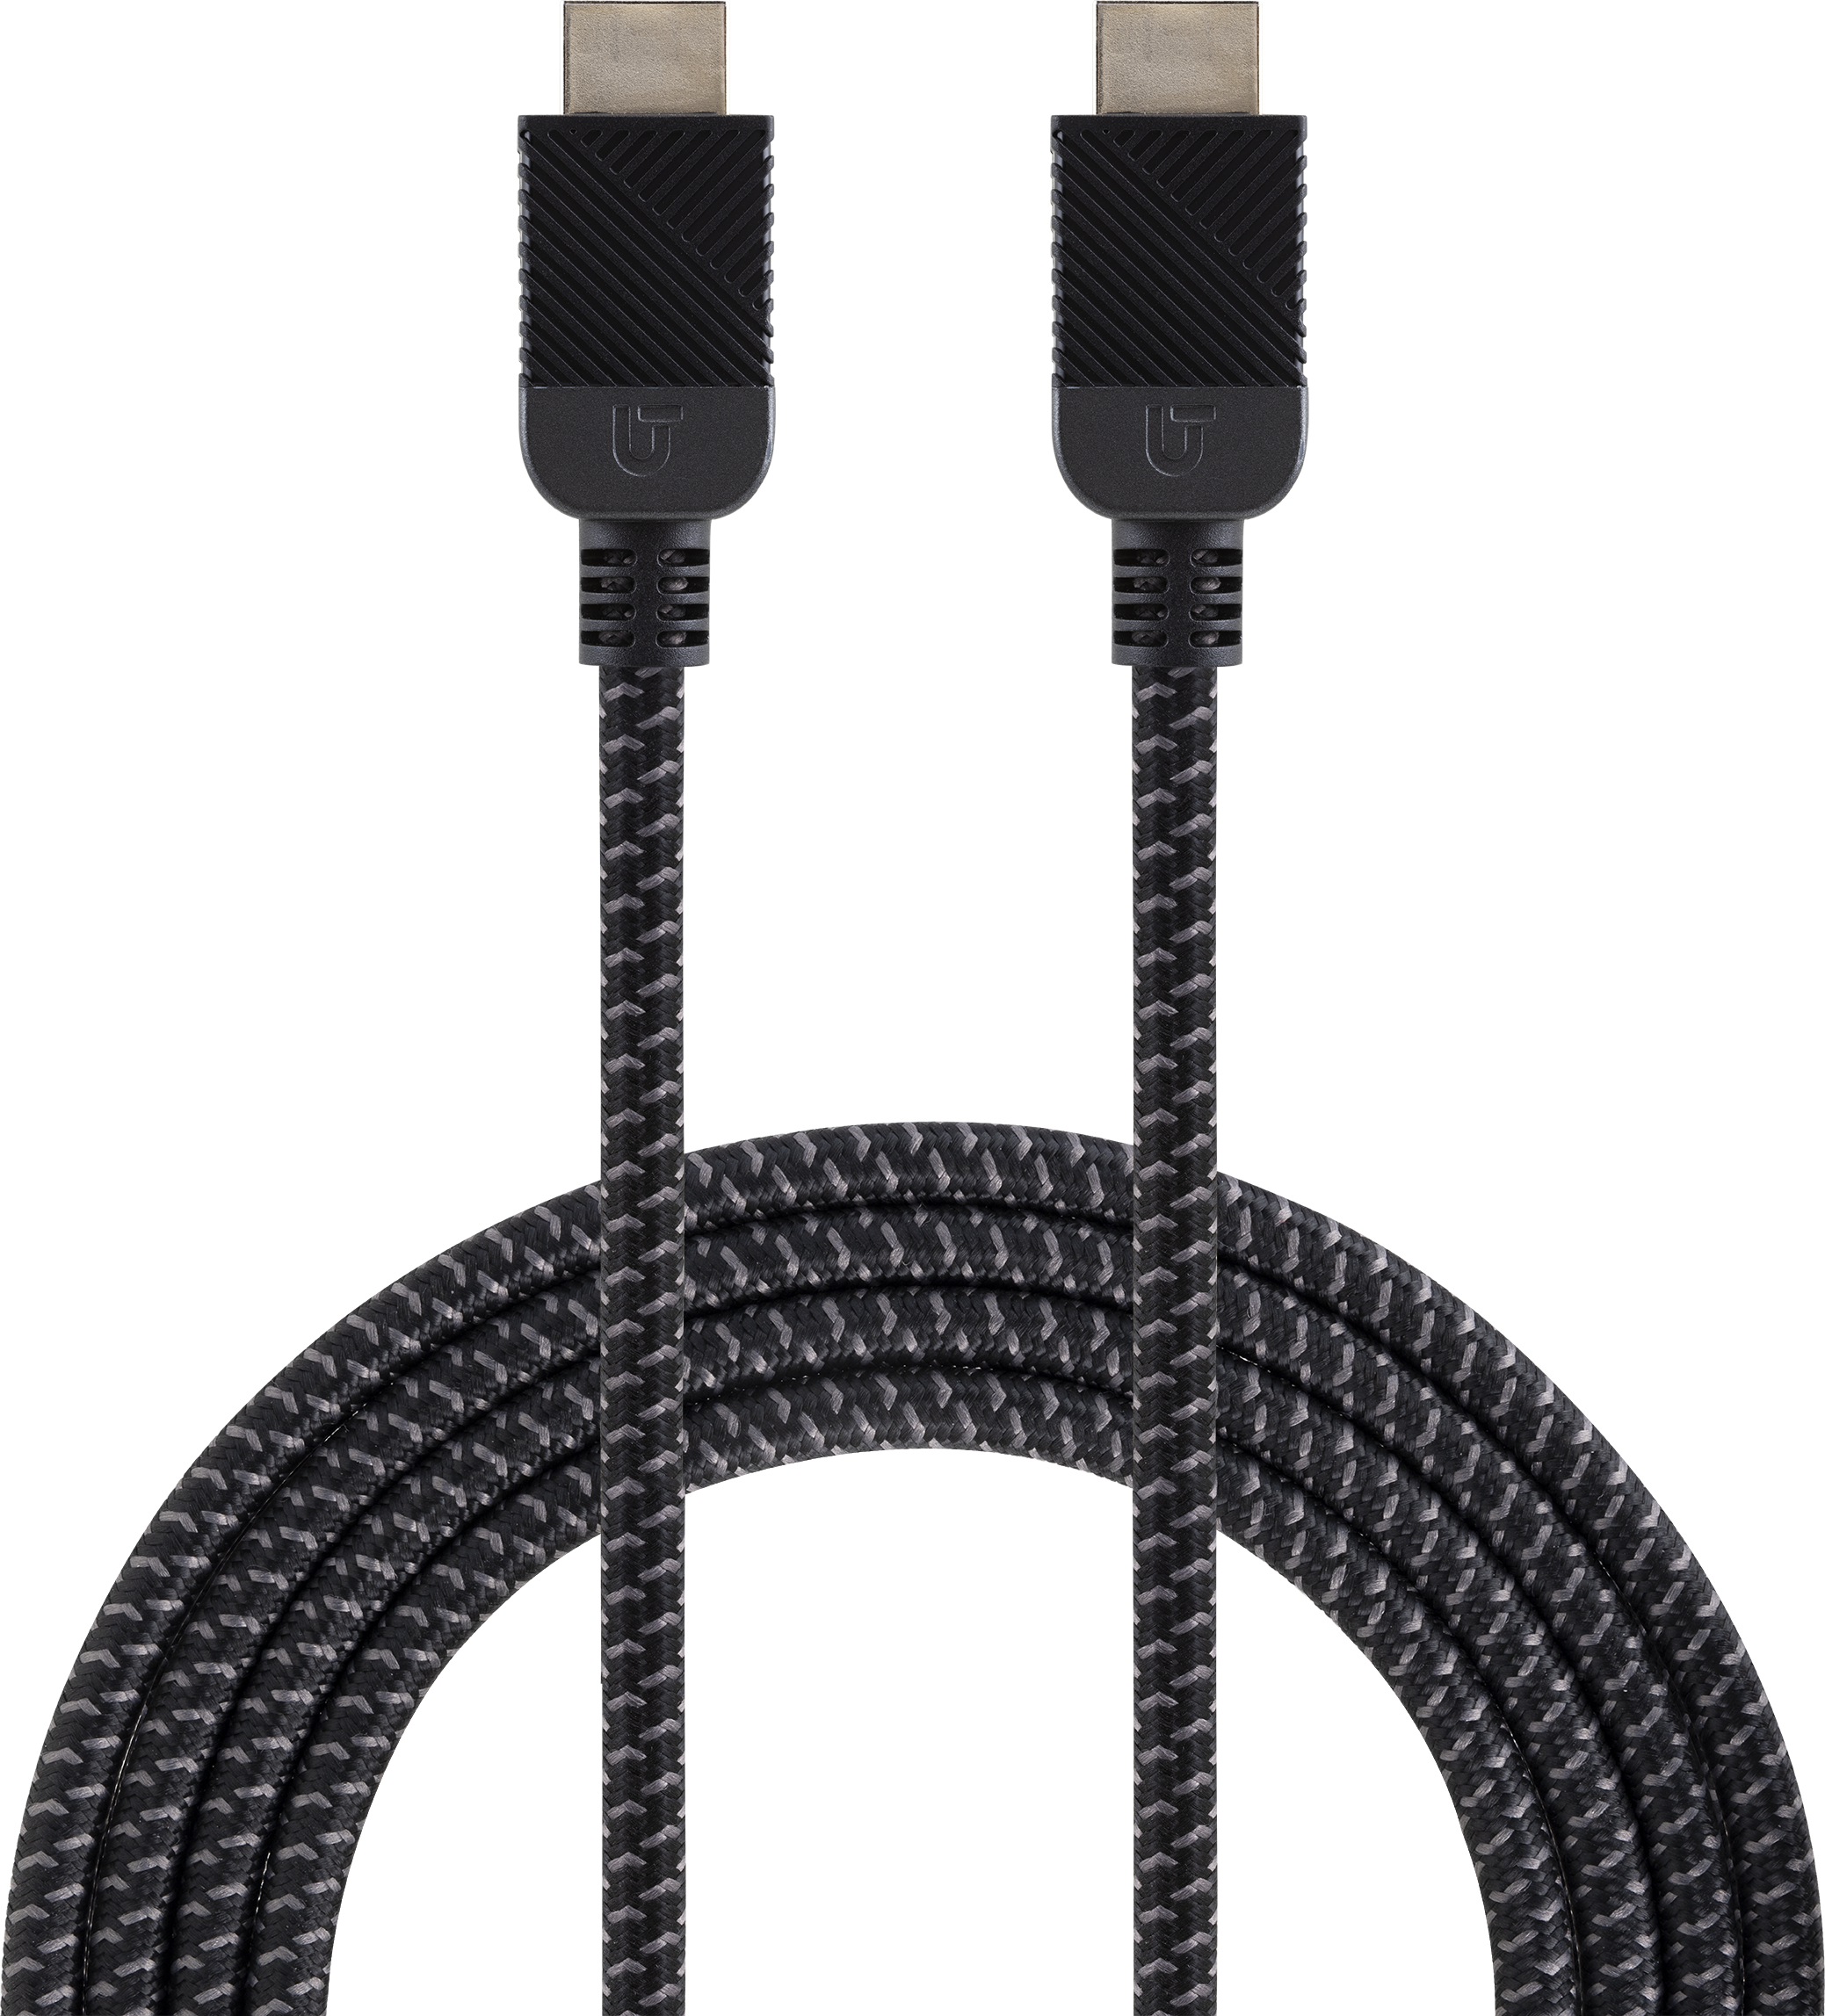 HDMI Cable 25 FT - 4K HDMI 2.0 Ready - High Speed - Ethernet/Audio Return  Channel - Gold Plated Connectors – Video HDMI